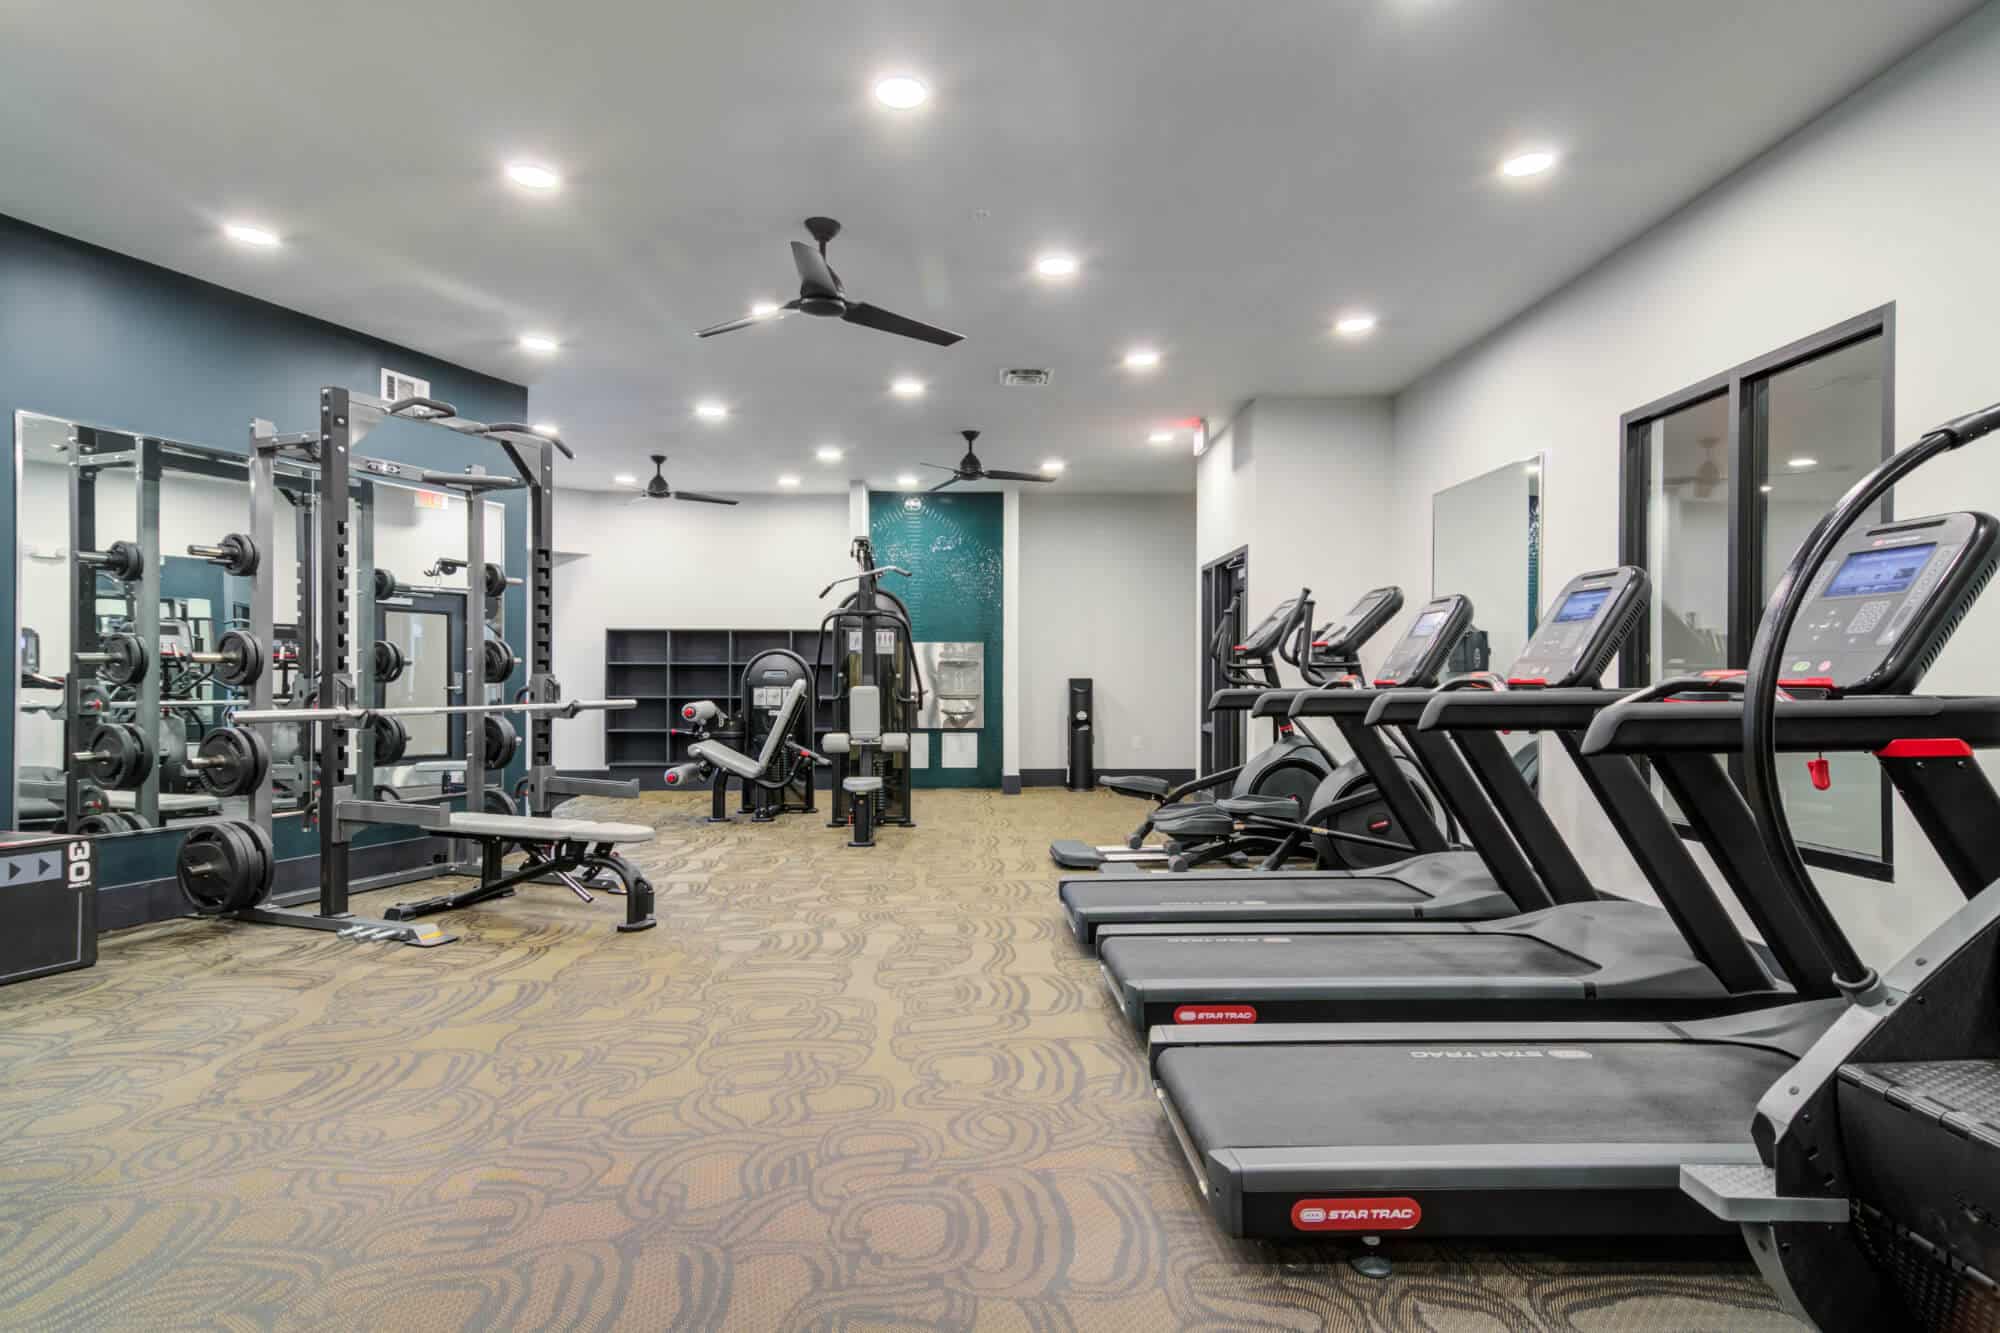 14 sixtyfive off campus apartments near kennesaw university 24 hour fitness center cardio and weights community amenities